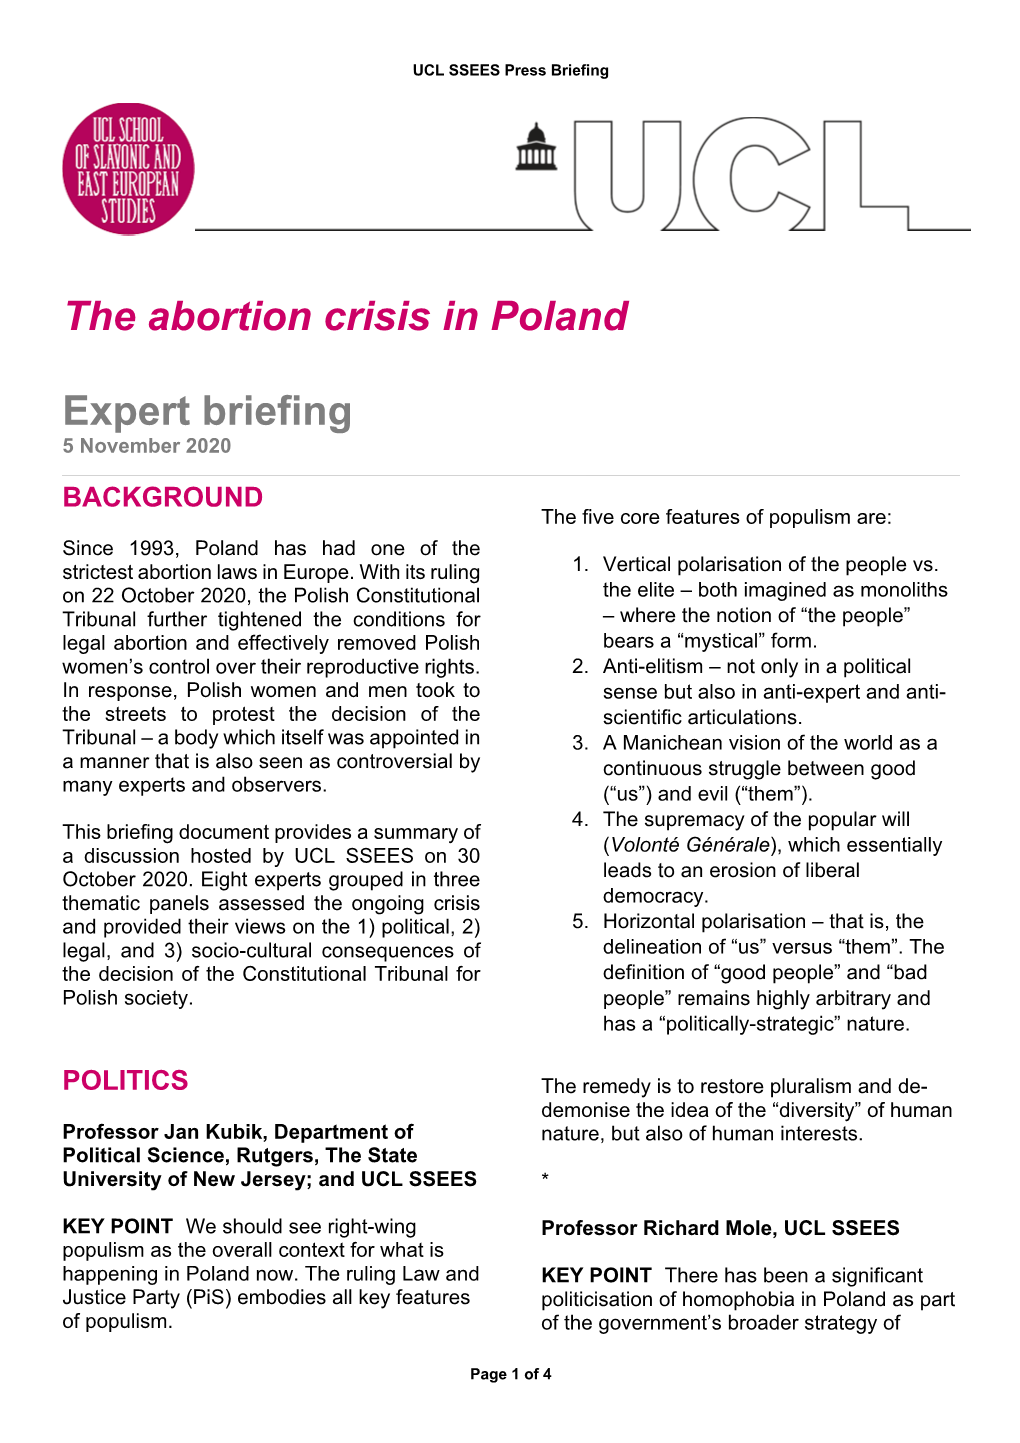 The Abortion Crisis in Poland Expert Briefing